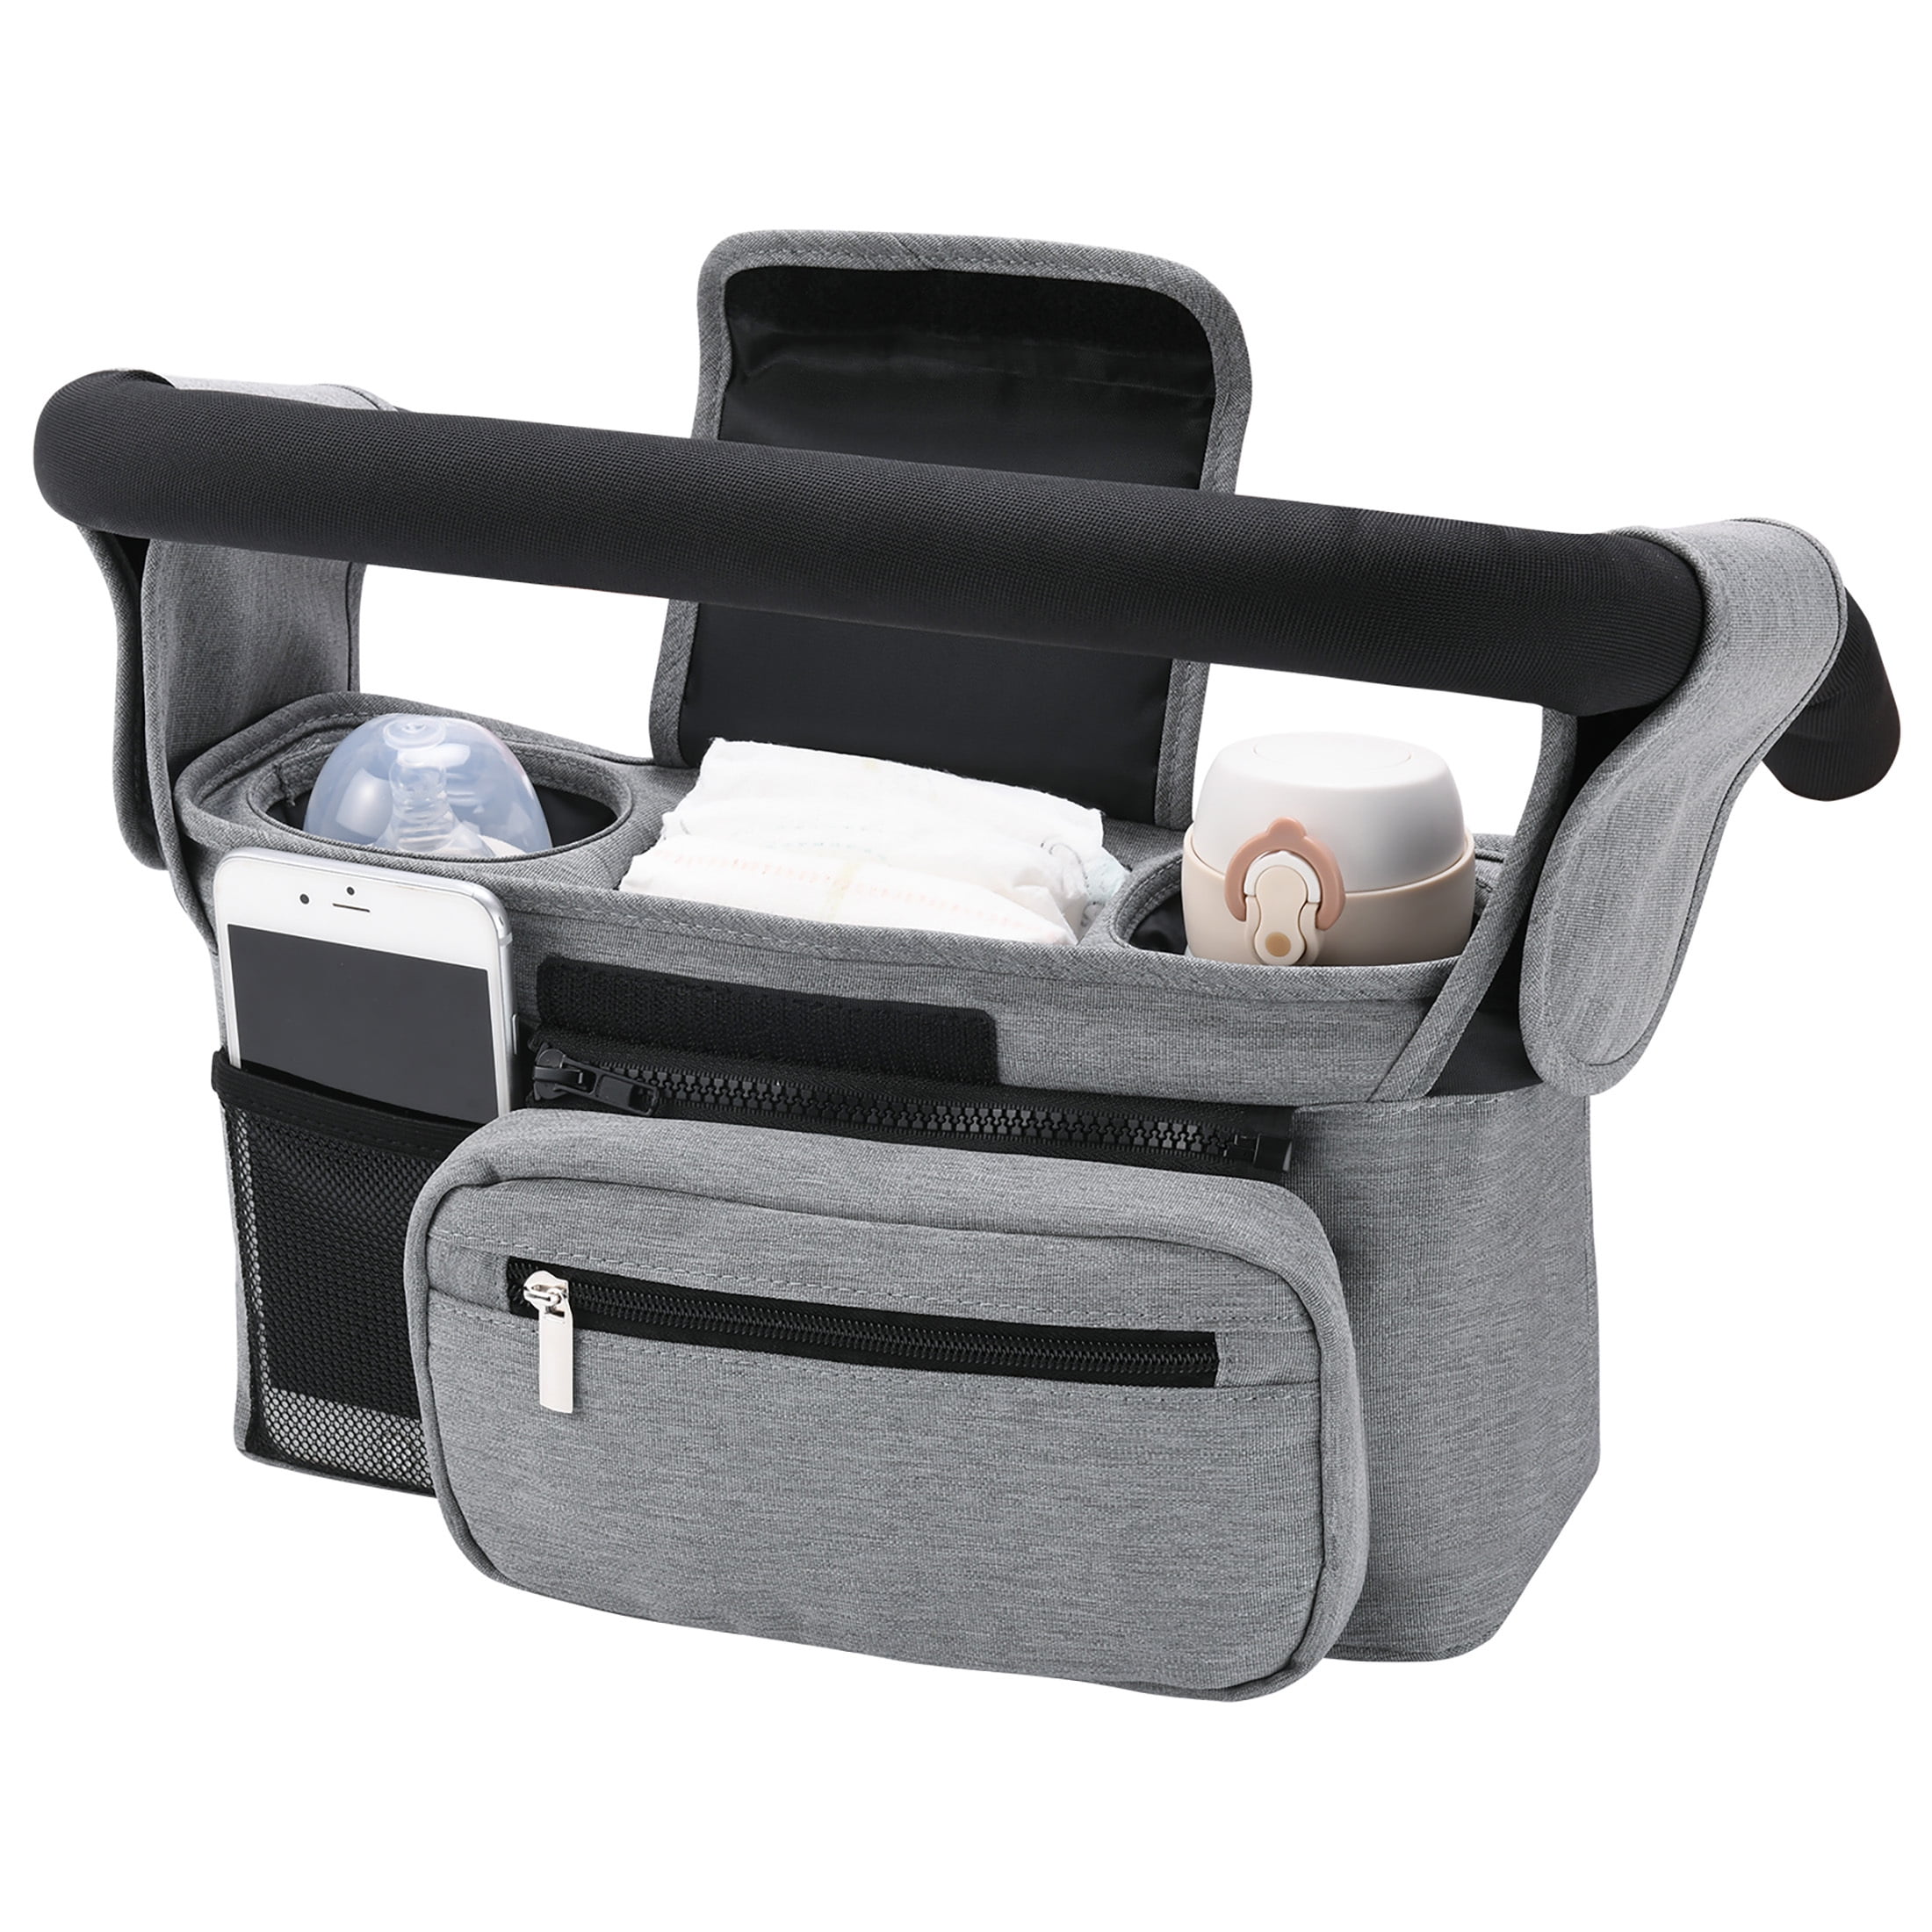 Stroller Organizer With Cup Holder Stylish Universal Stroller Organizer Bag With Insulated Cup Holders And Universal Attachment Straps Fits Most Single and Double Baby and Pet Strollers 